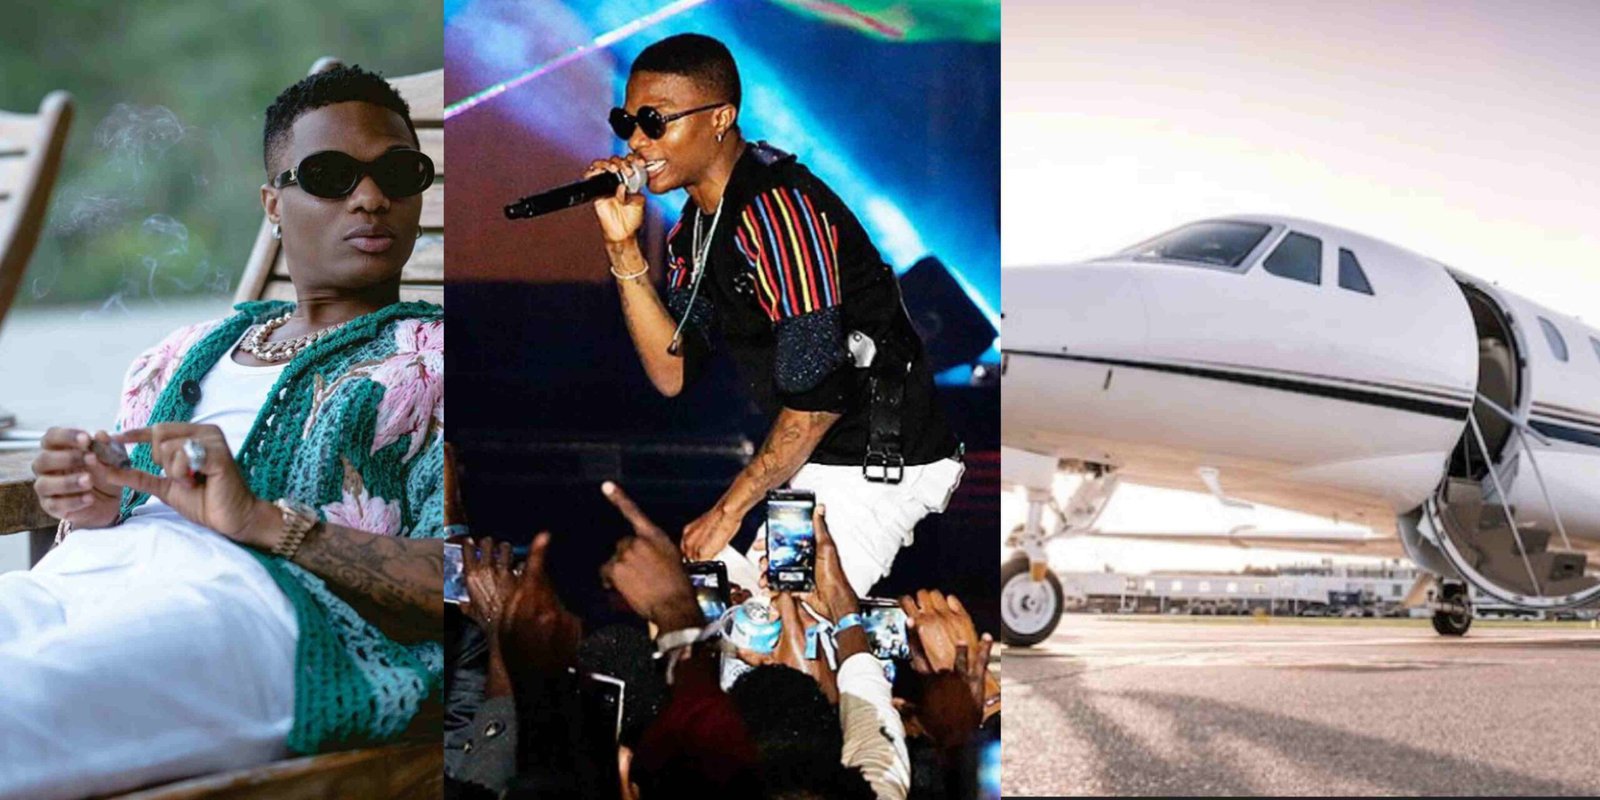 "Wizkid bought a private jet and didn't even announce it" - Fans express surprise at singer's revelation in a stage (WATCH)